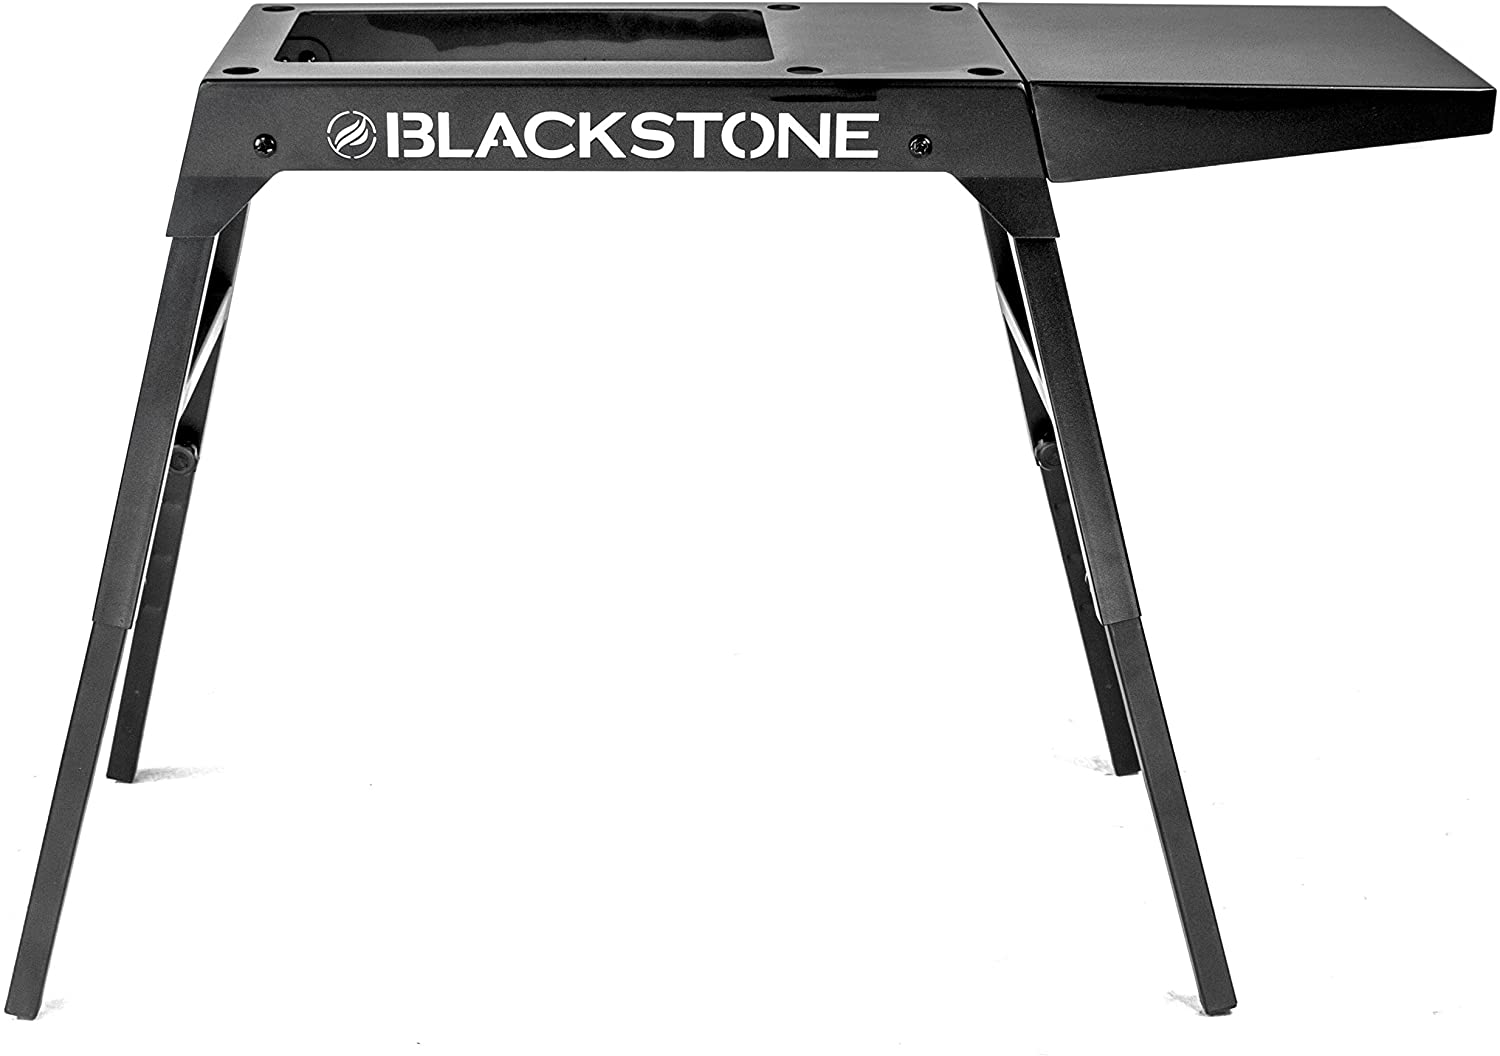 Blackstone Universal Griddle Stand with Adjustable Leg and Side Shelf $79 at Amazon and Walmart